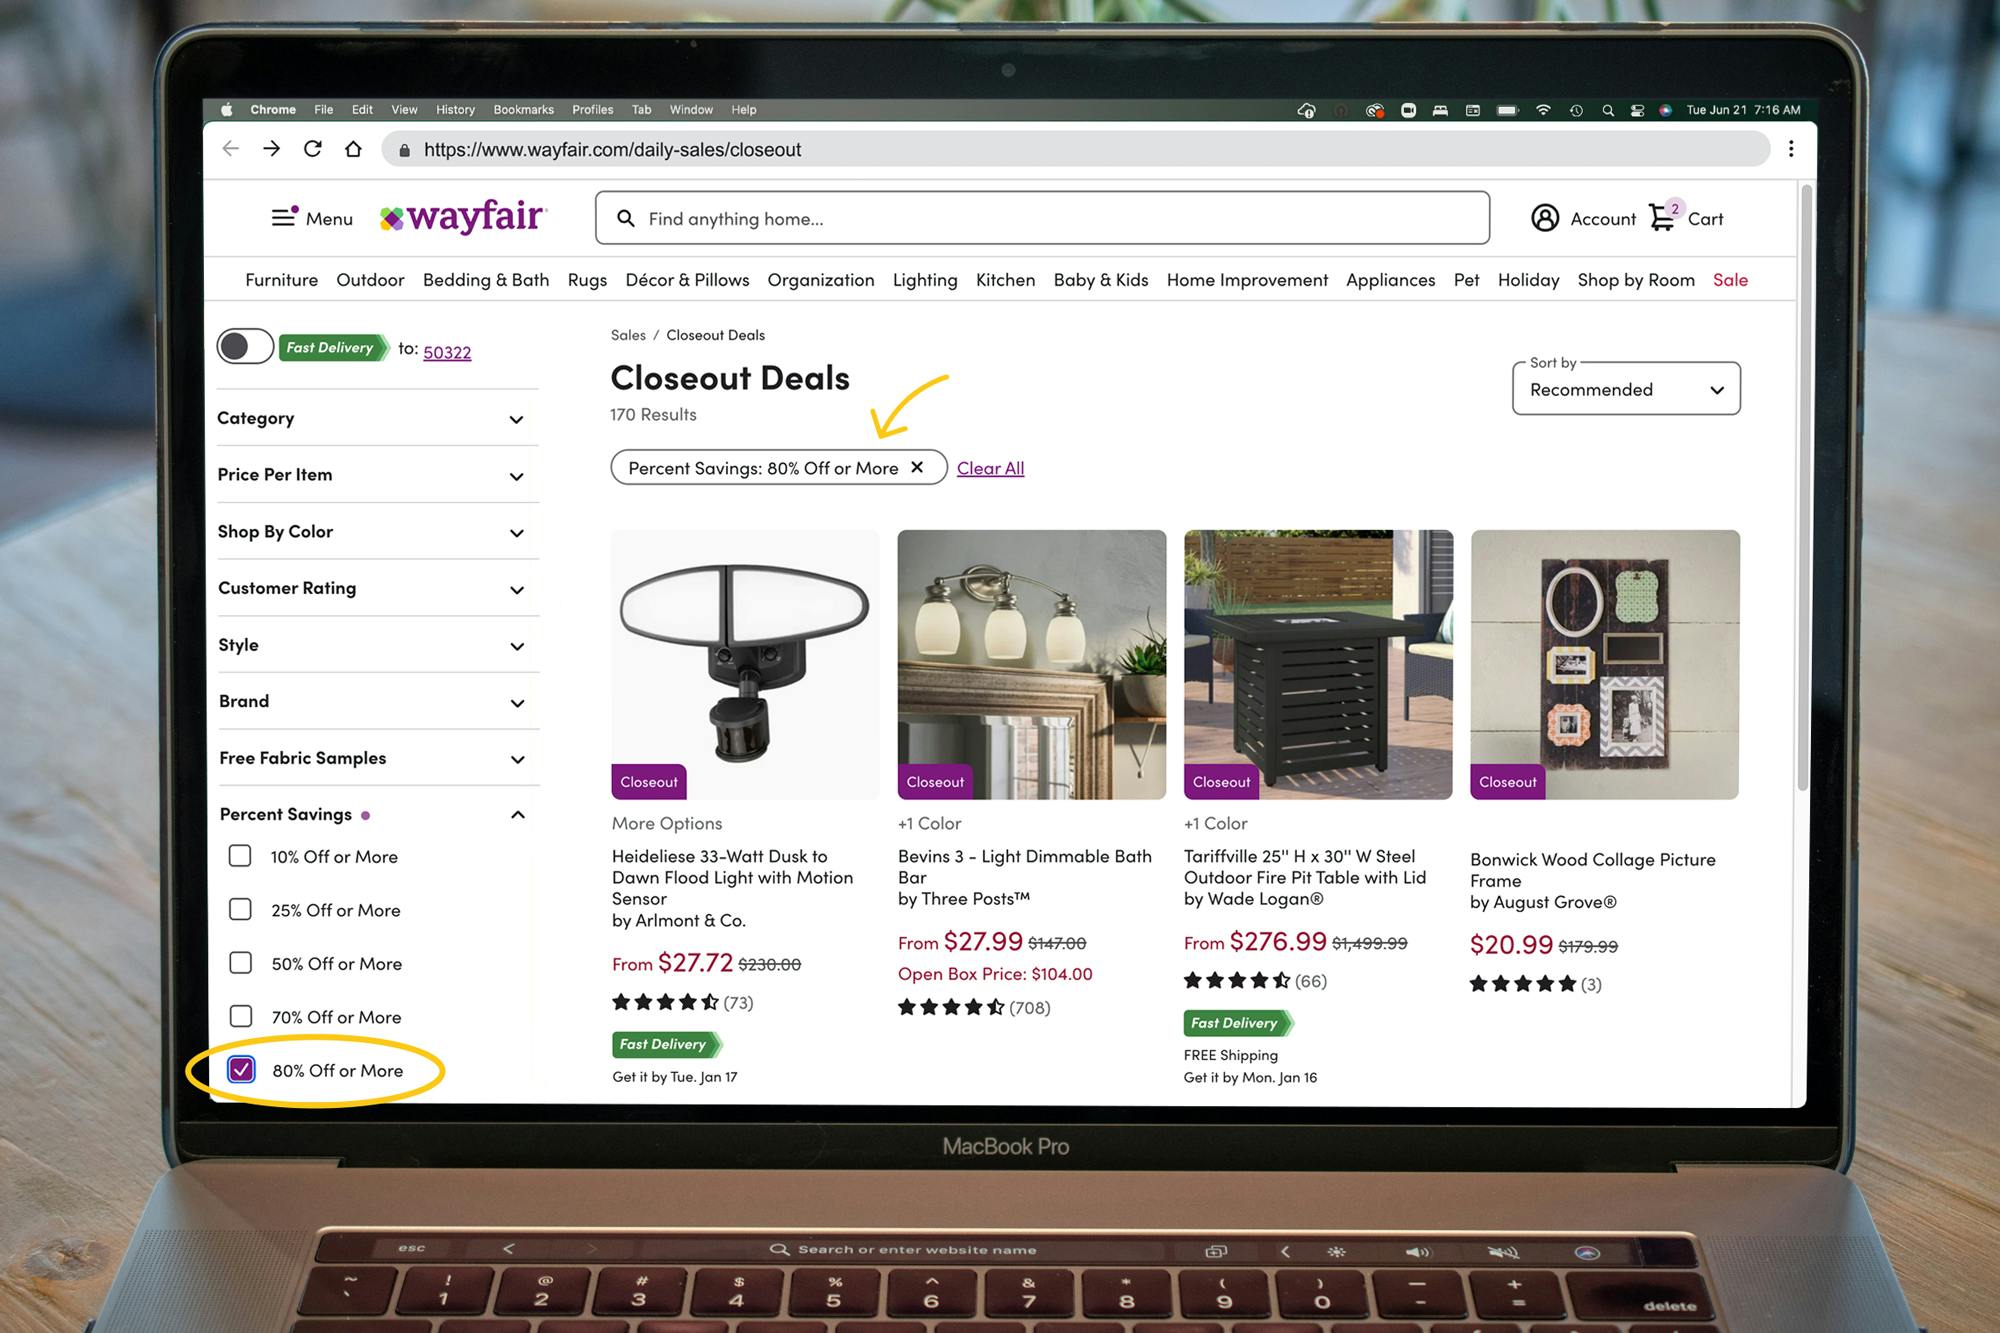 How To Save with Wayfair Deals and Coupons - The Krazy Coupon Lady